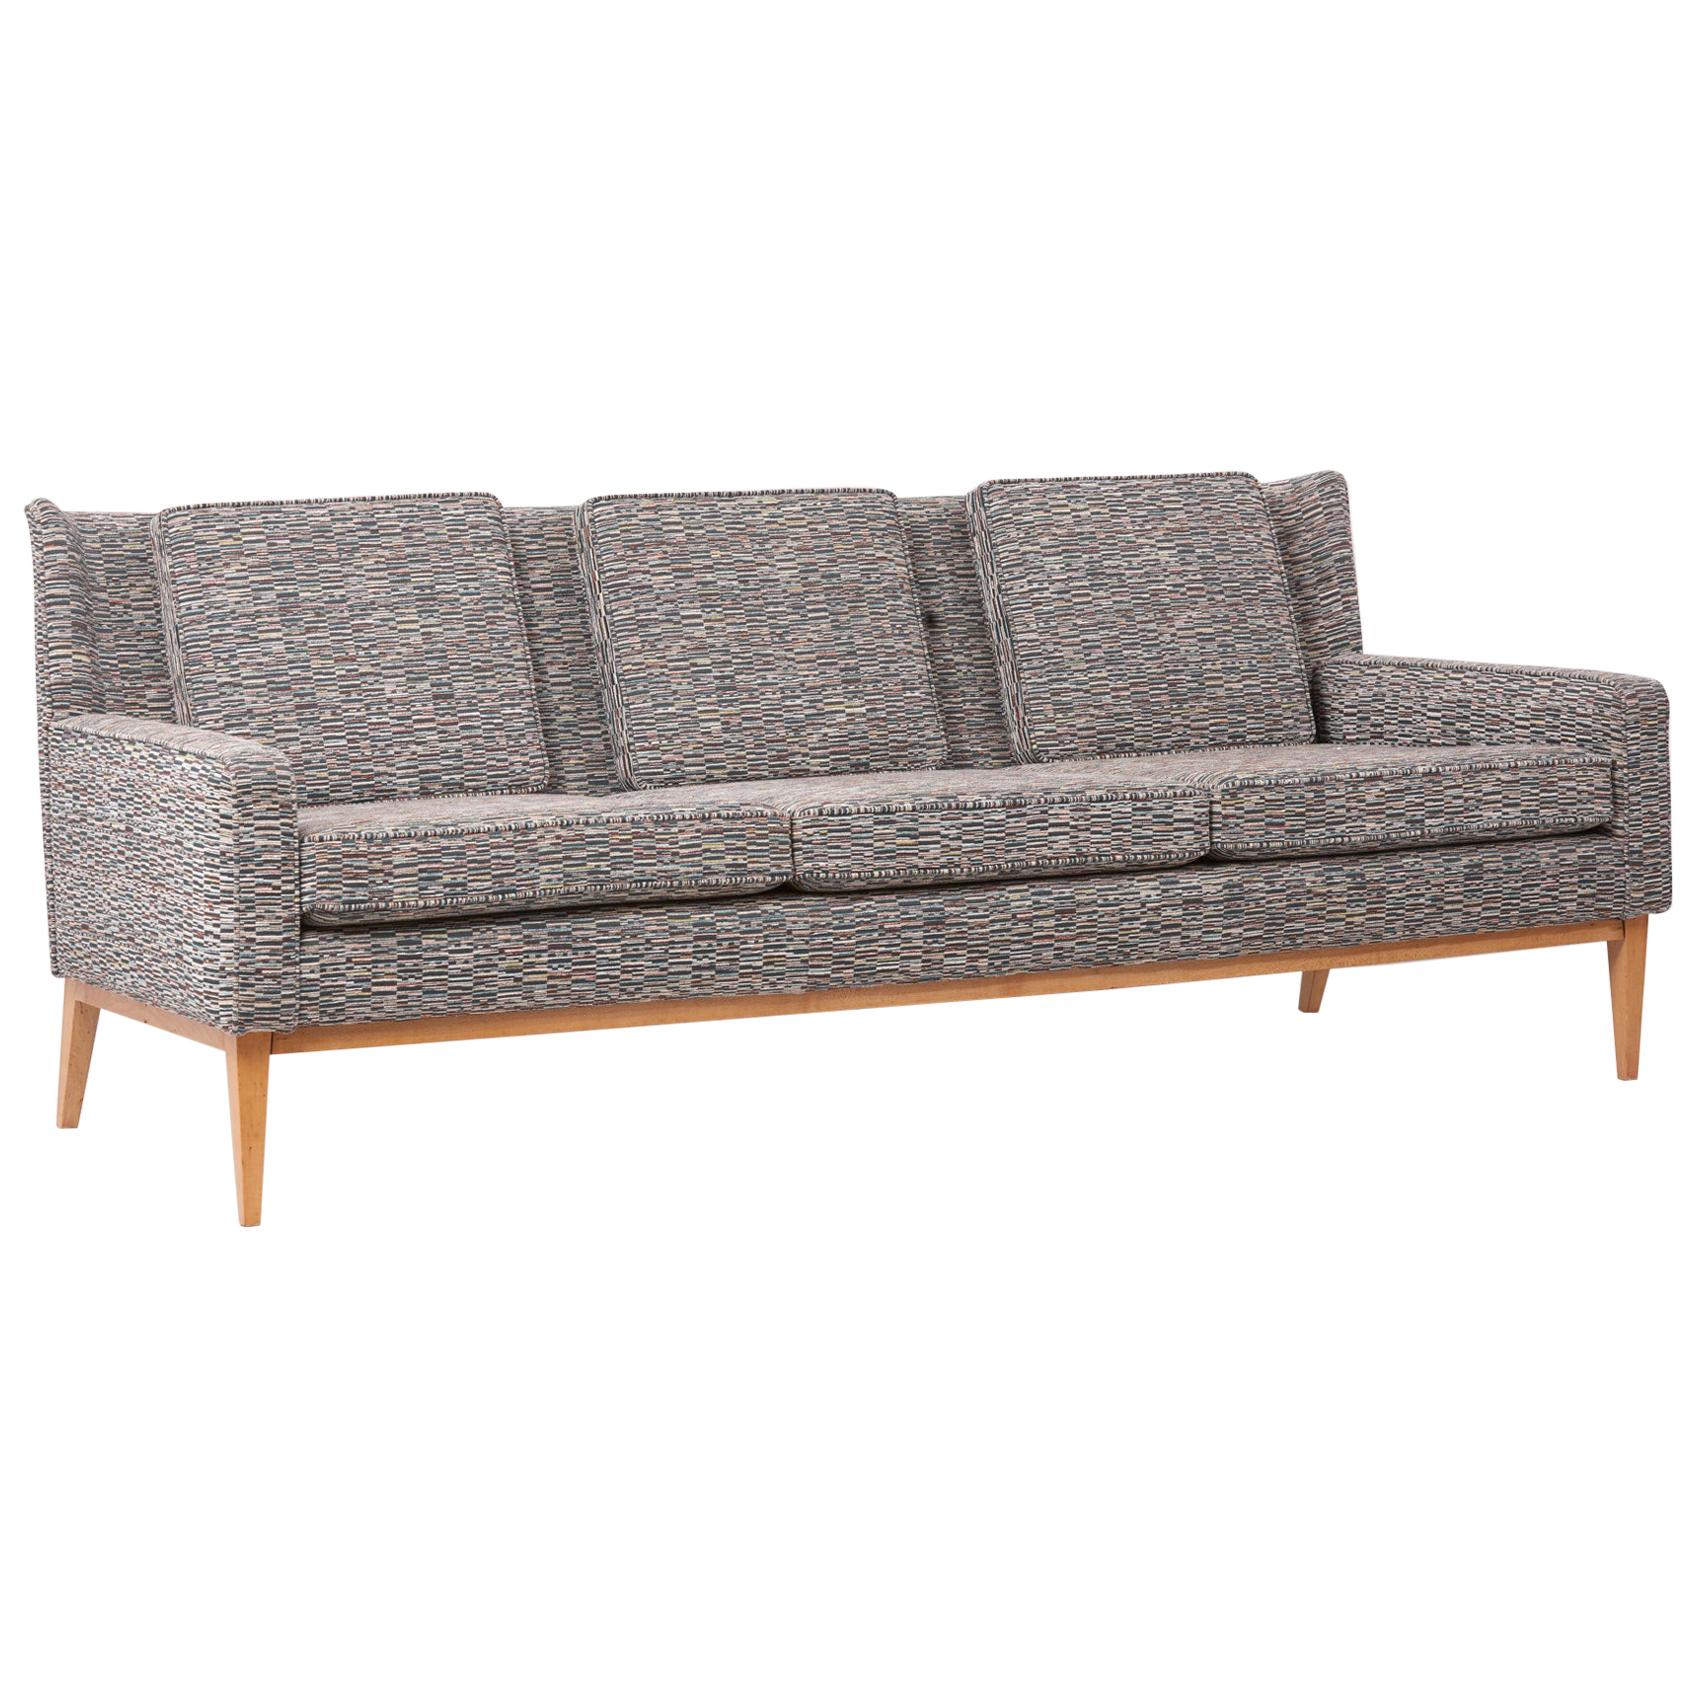 Newly Upholstered Wingback Sofa 1307 by Paul McCobb for Directional, US, 1950s For Sale